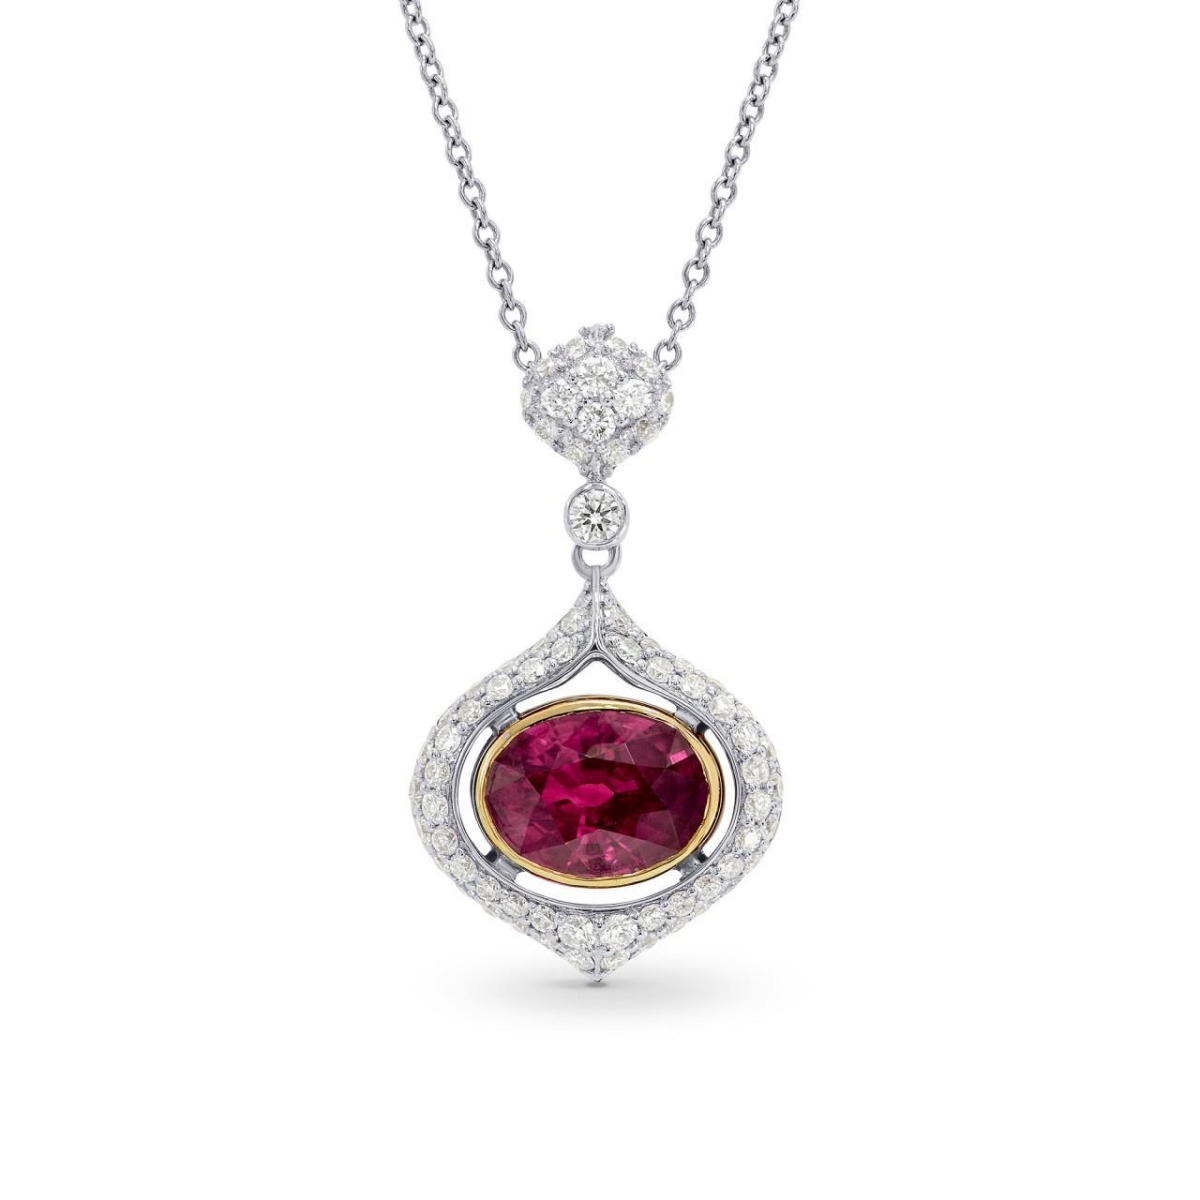 Hc10509 1.85 Ct Gold Lady Red G Oval Cut Ruby With Diamond Necklace Pendant